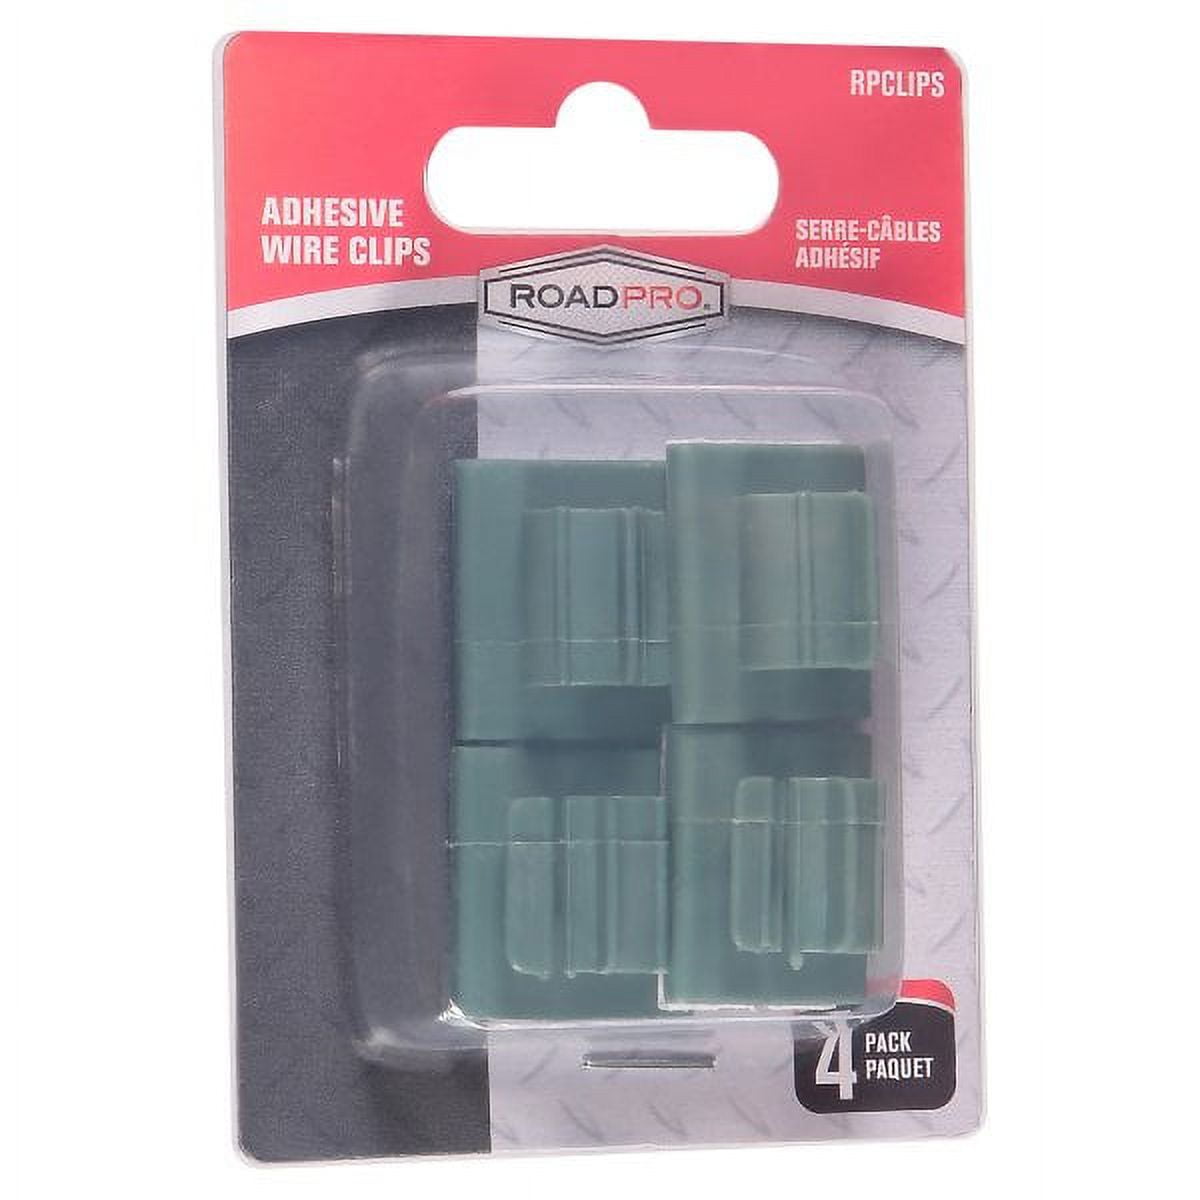 RoadPro RPCLIPS Green Self-Adhesive Wire/Cable Management Clips (4